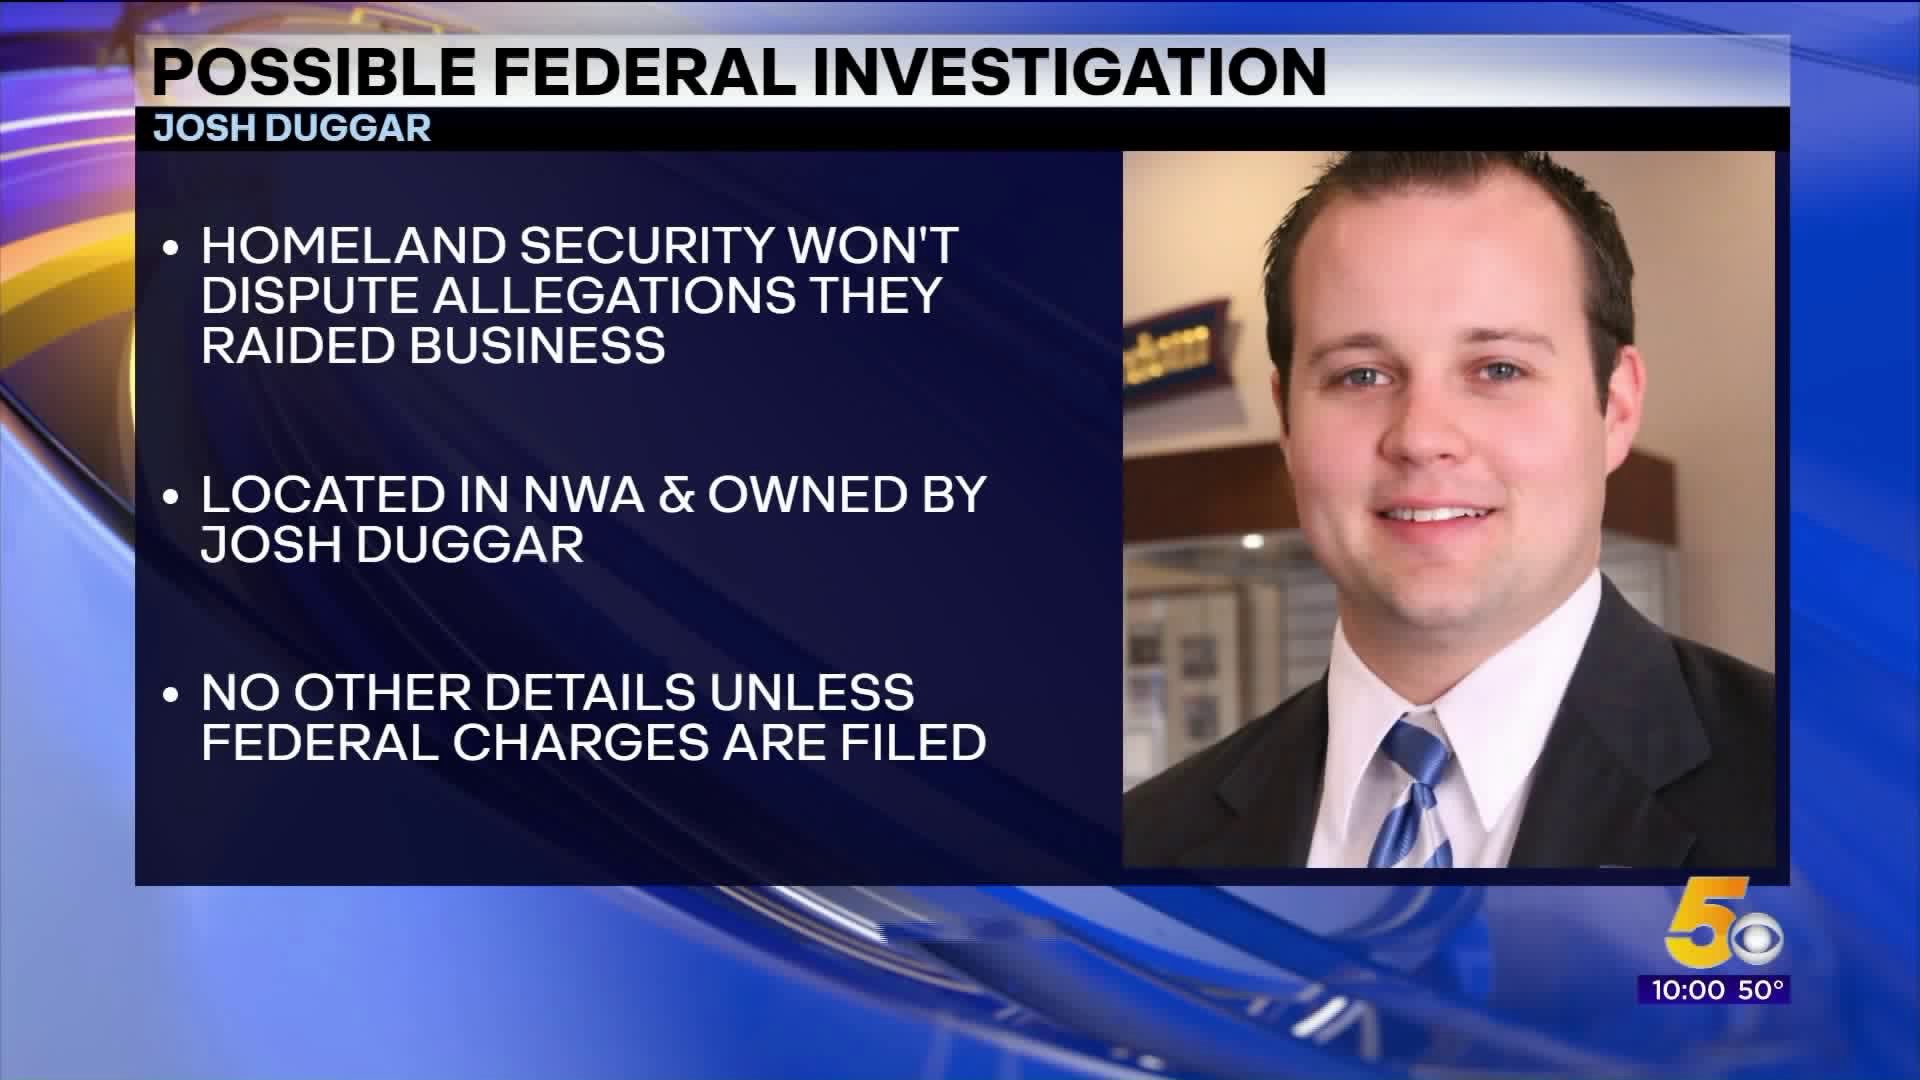 Homeland Security Does Not Dispute Raid On NWA Business Owned By Josh Duggar